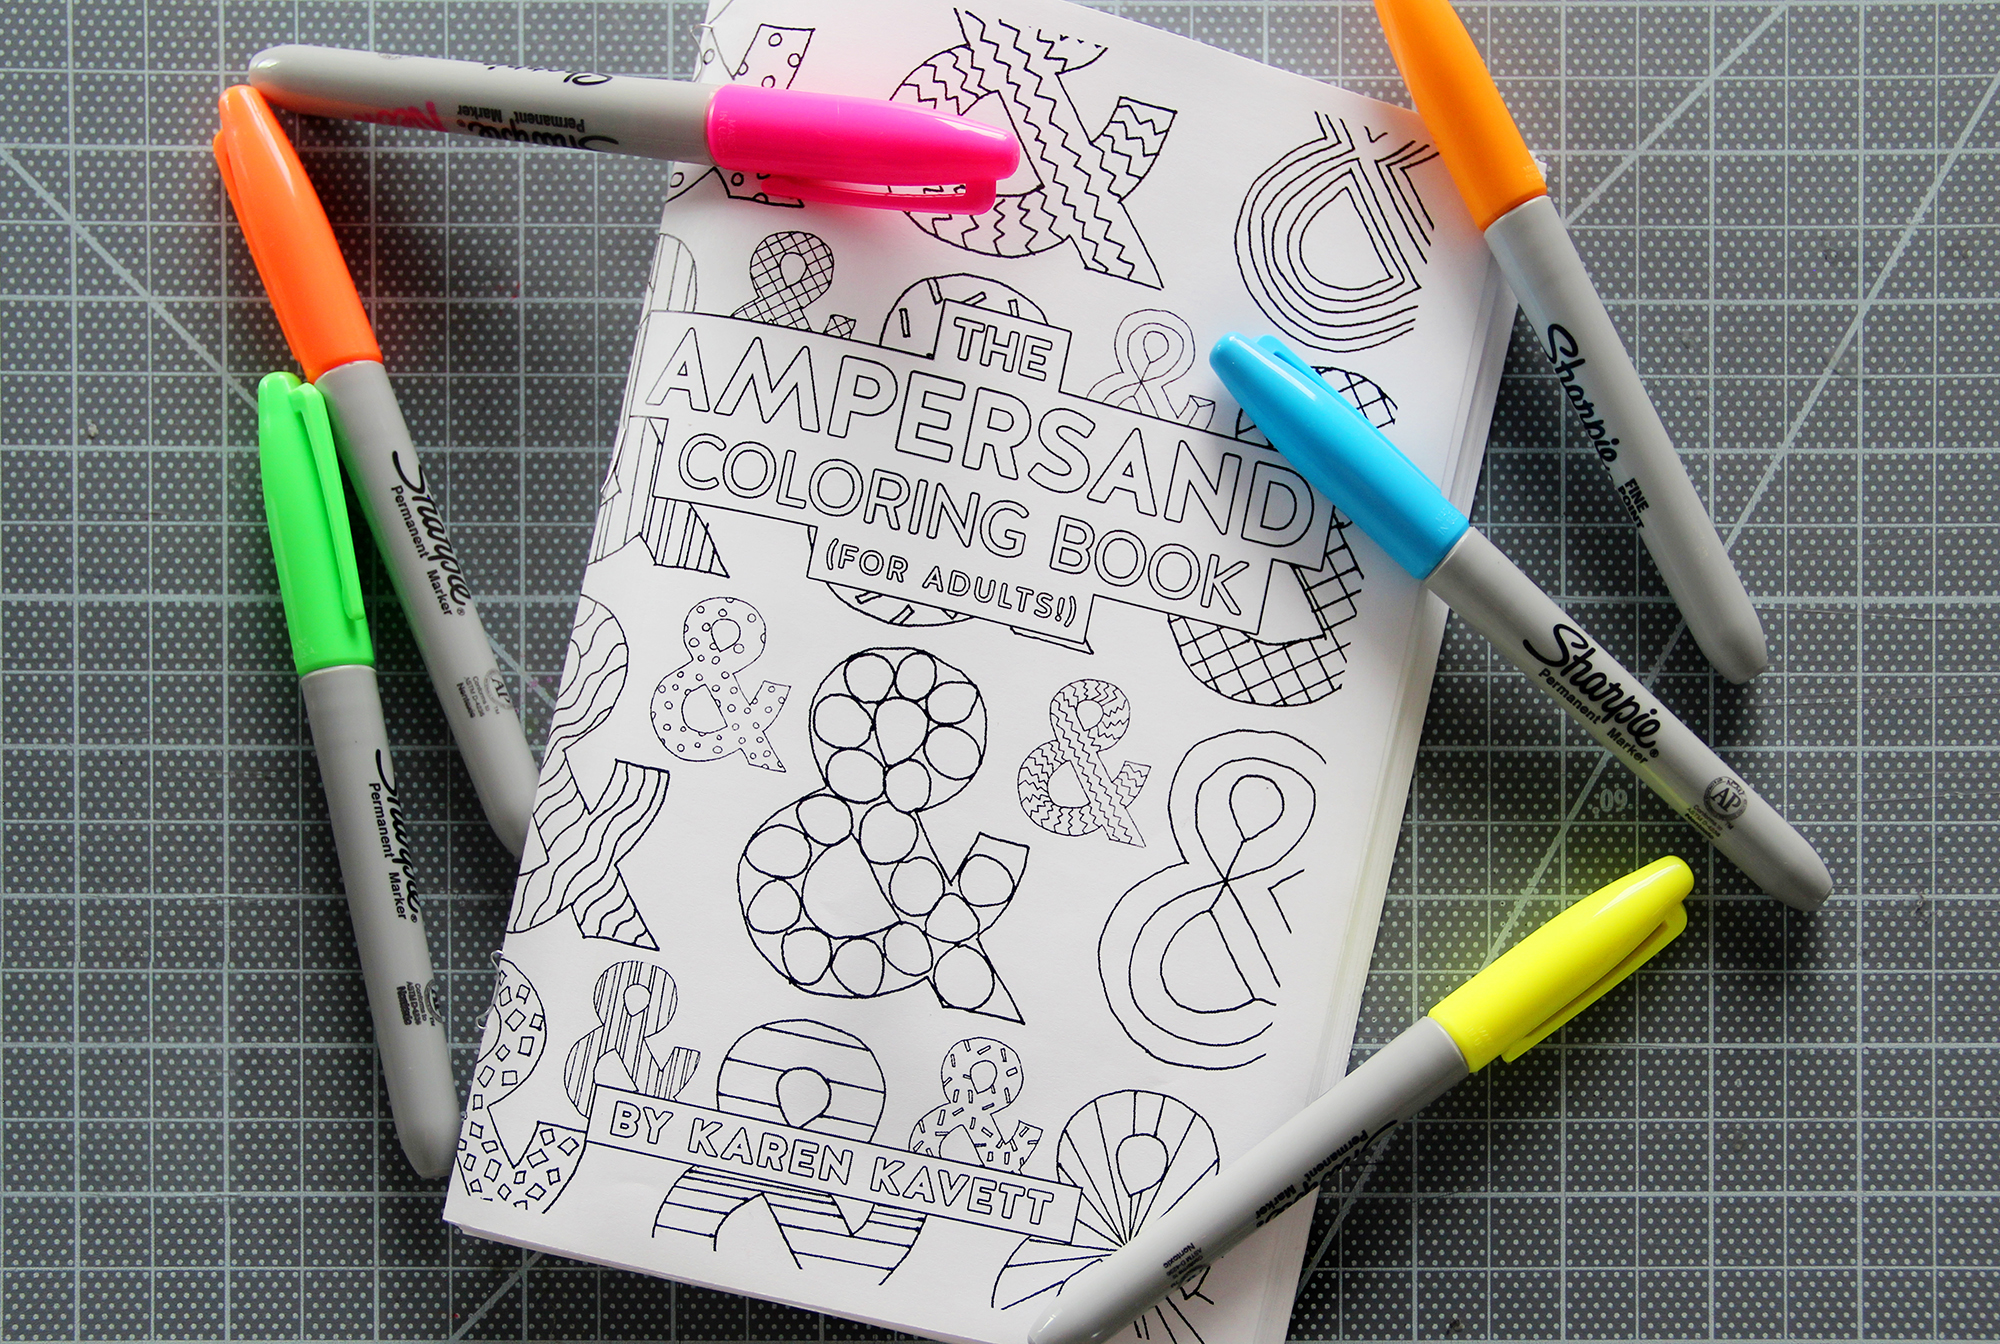 Available Now: The Ampersand Coloring Book for Adults - Karen Kavett